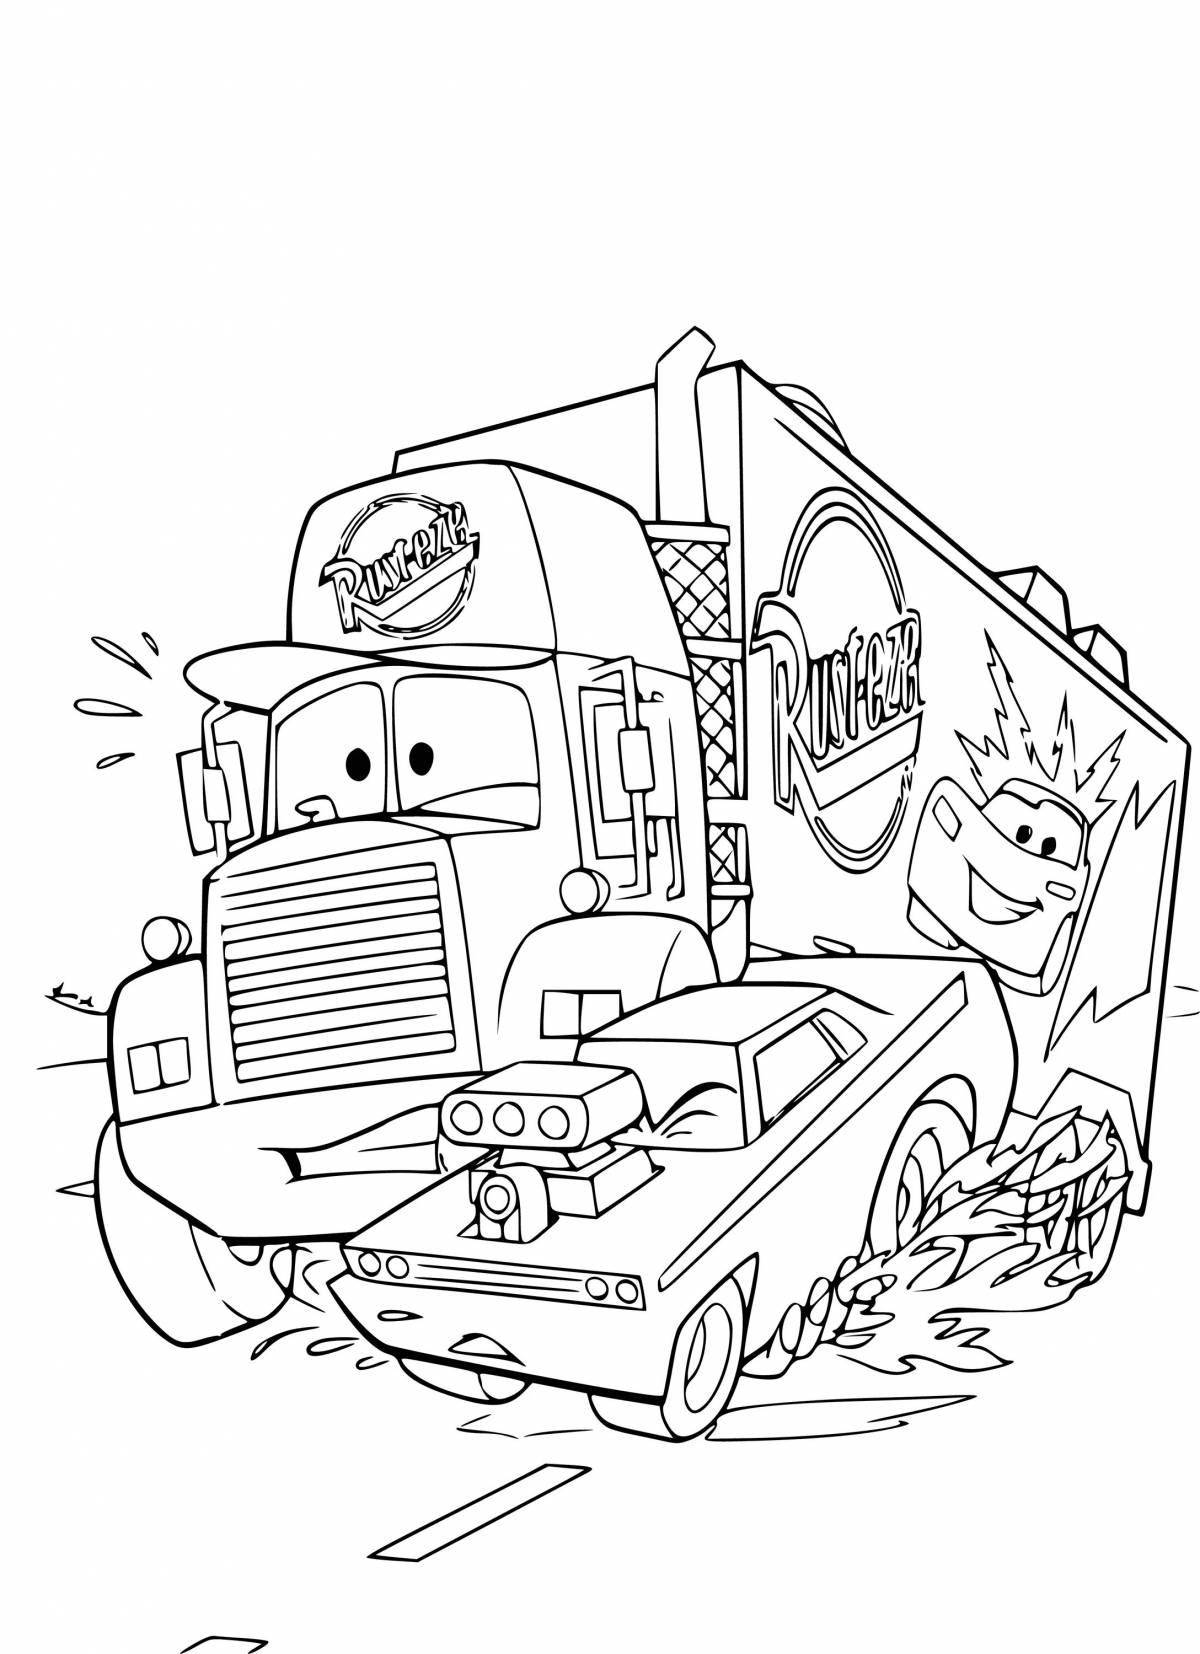 Coloring page delightful harvesters